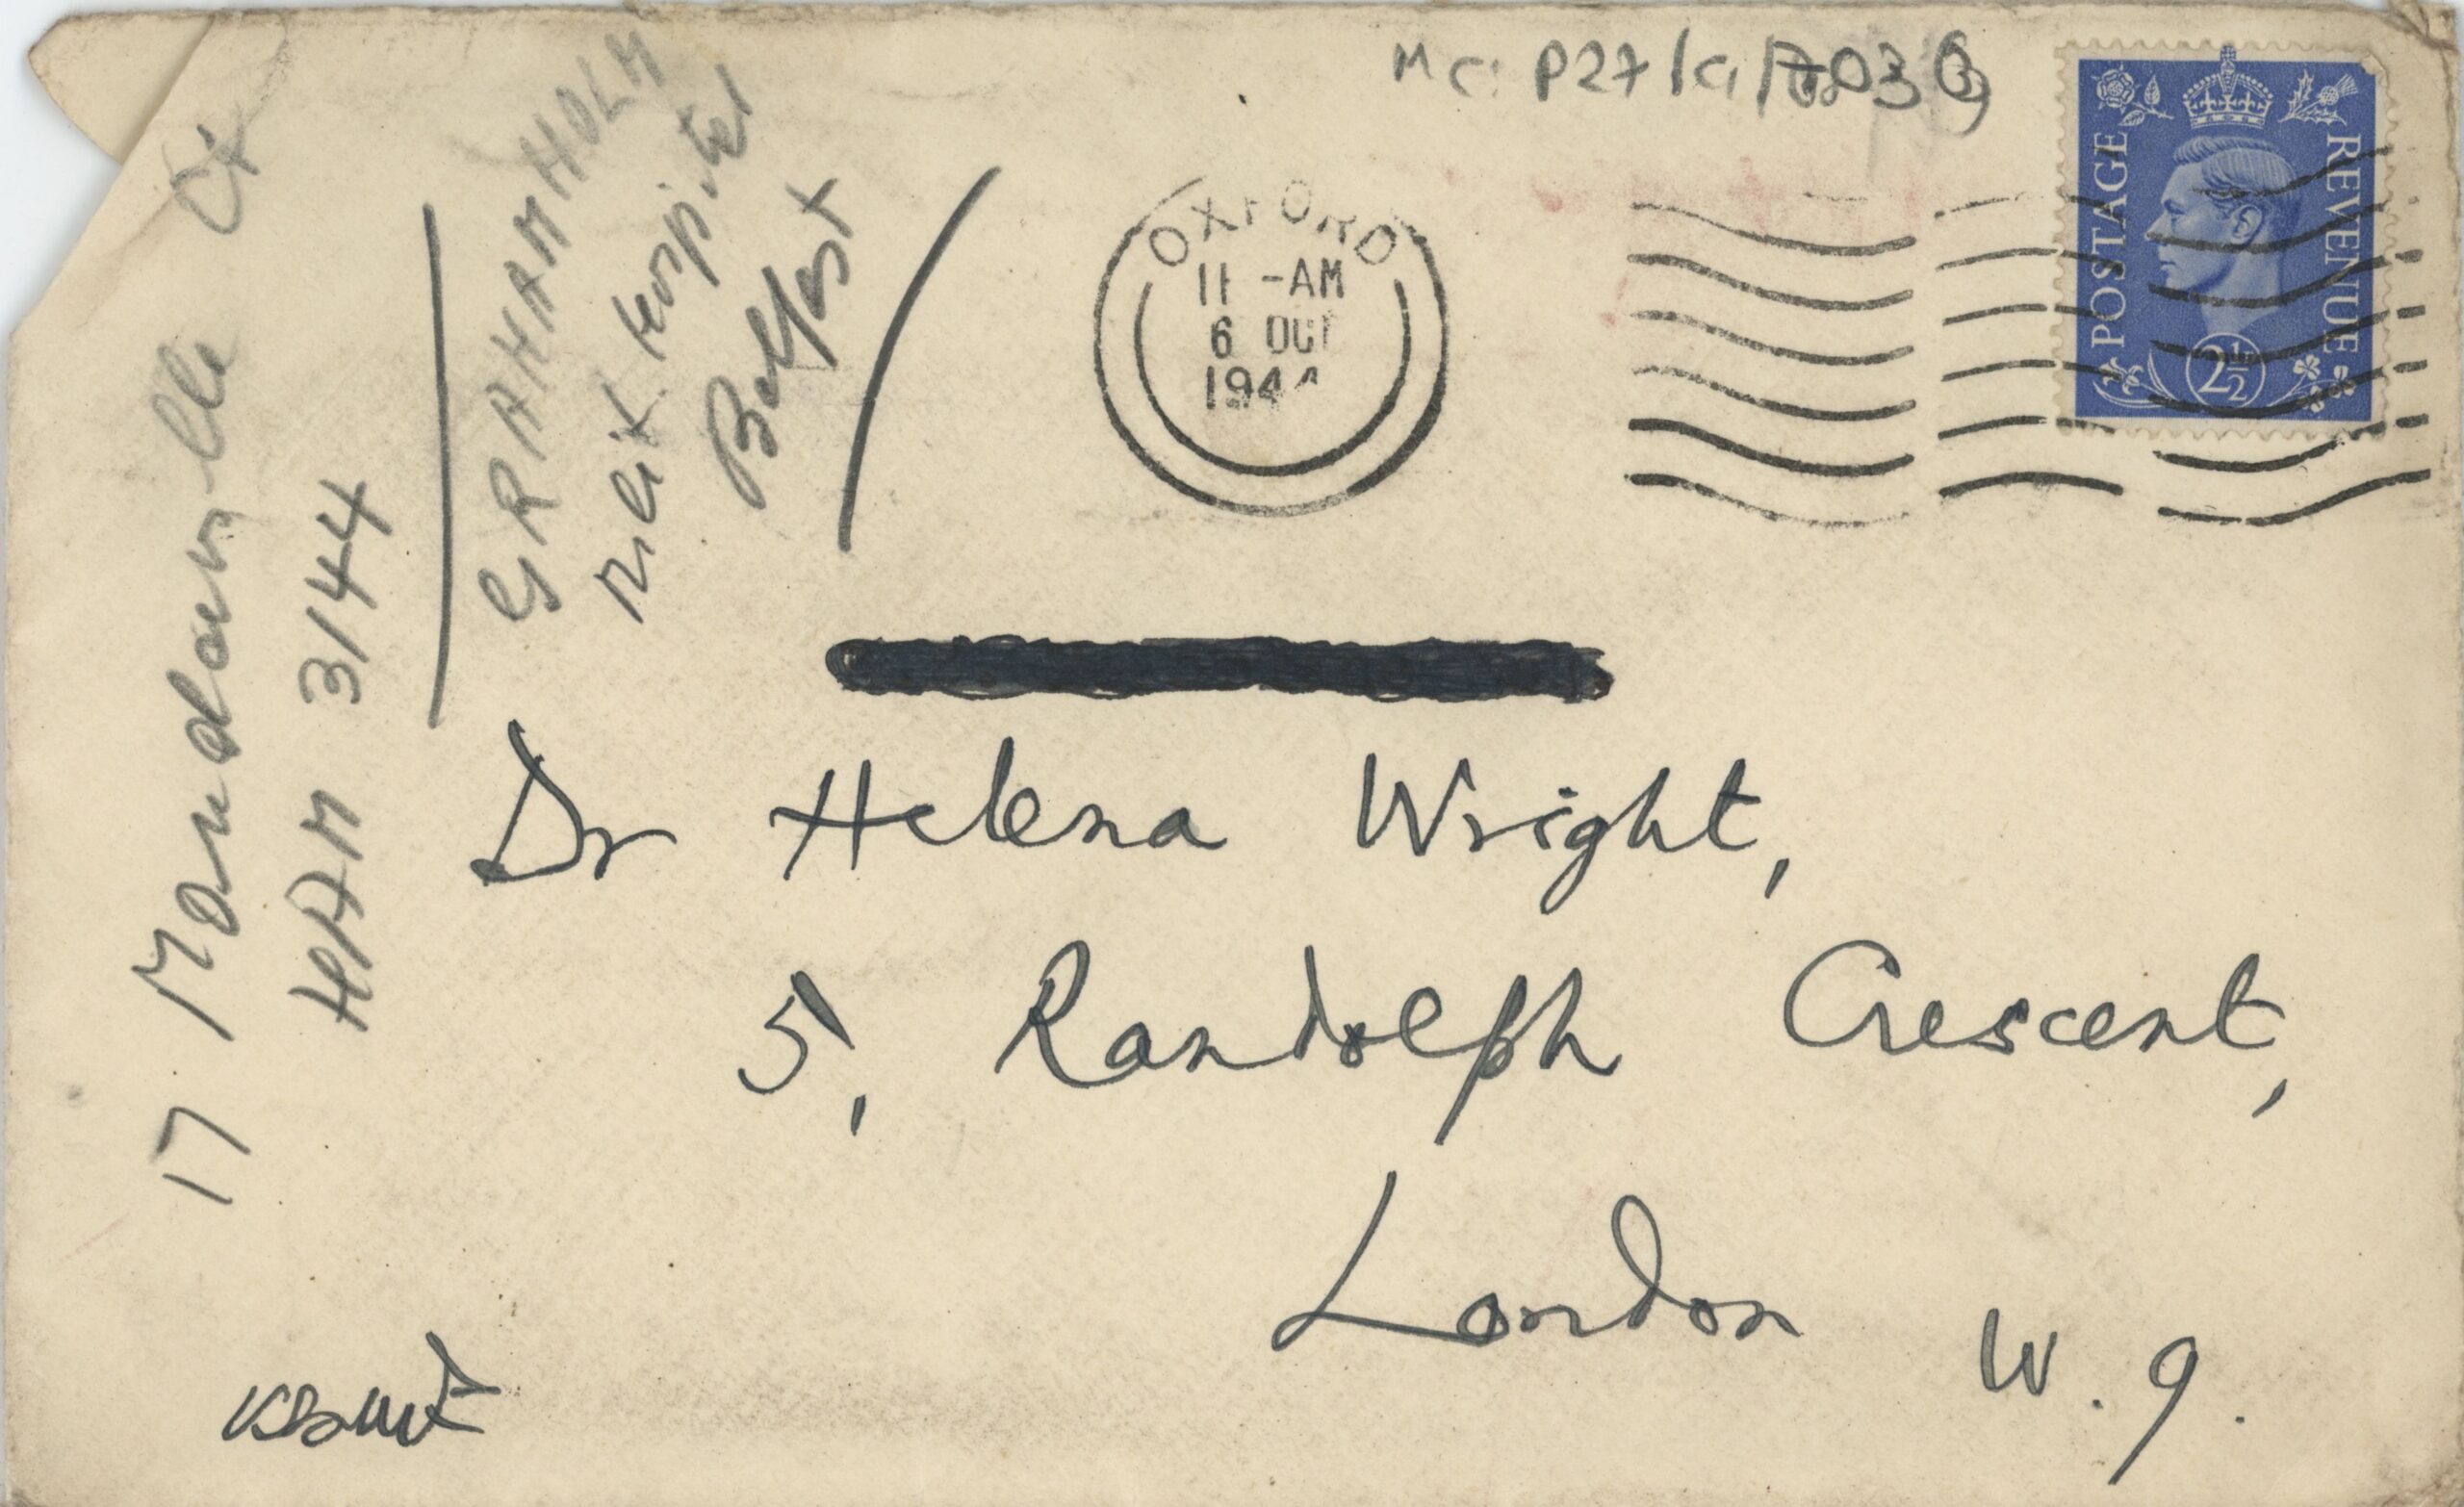 Envelope, directed to Dr Helena Wright. It has a George VI stamp on it.